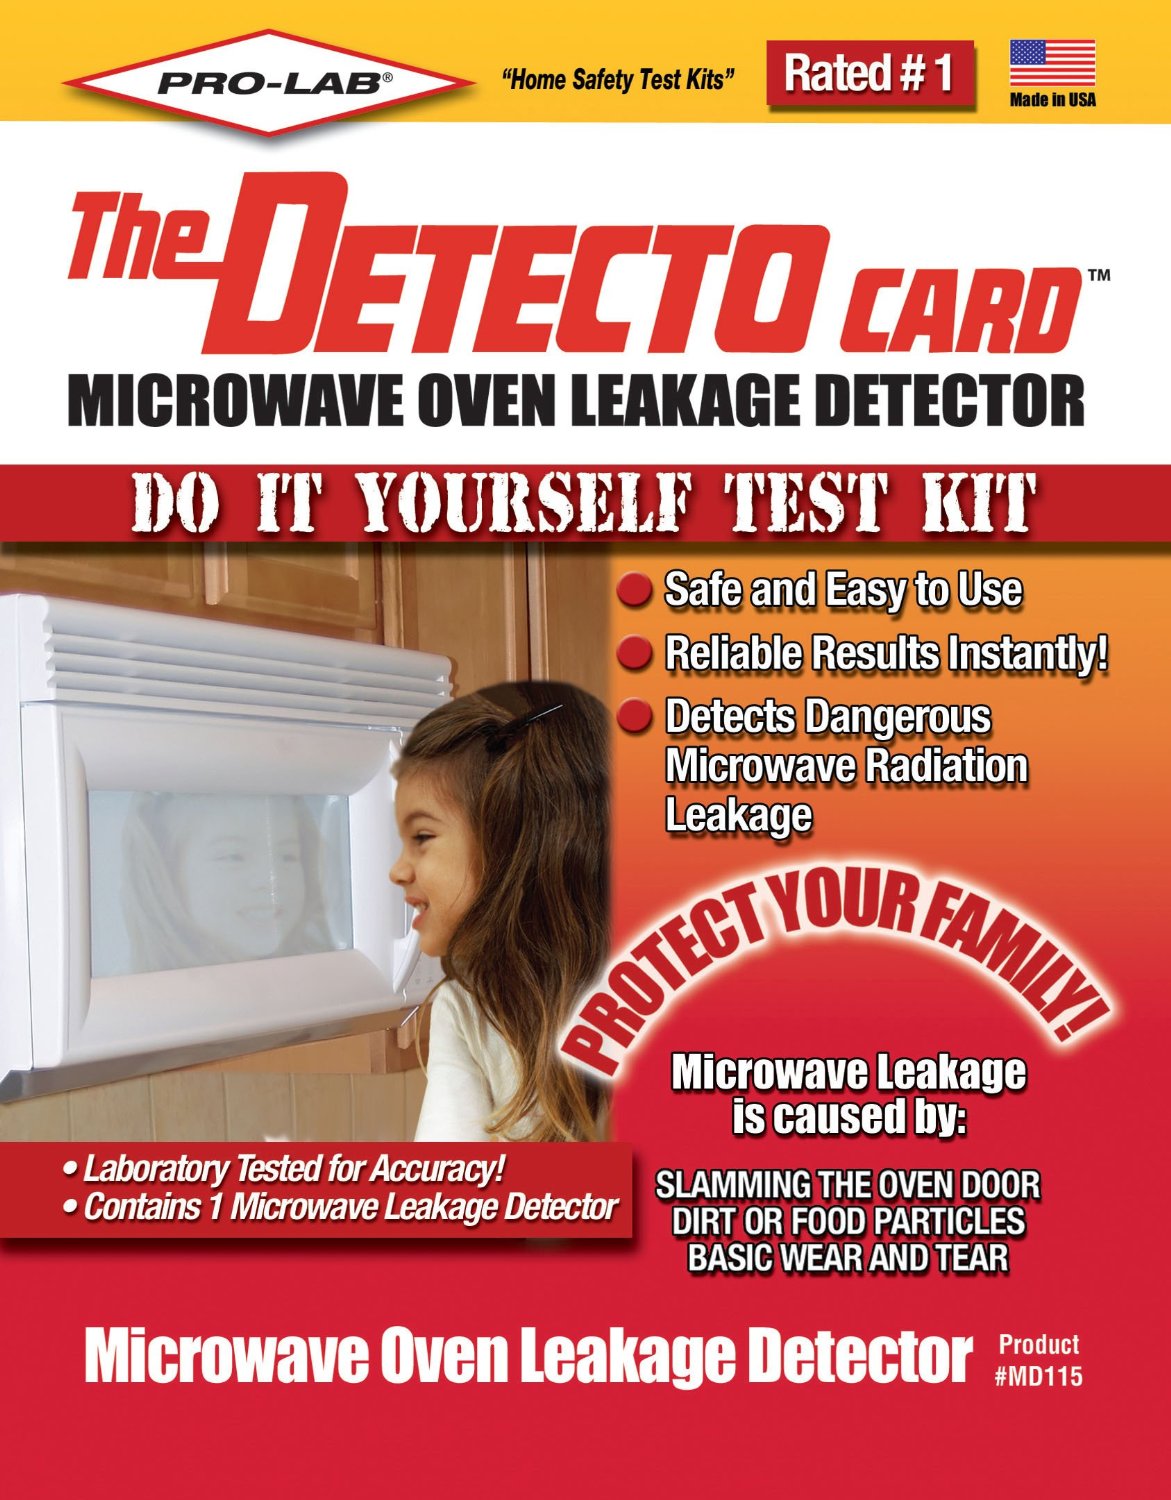 Pro-lab Md115 Microwave Oven Leakage Detector